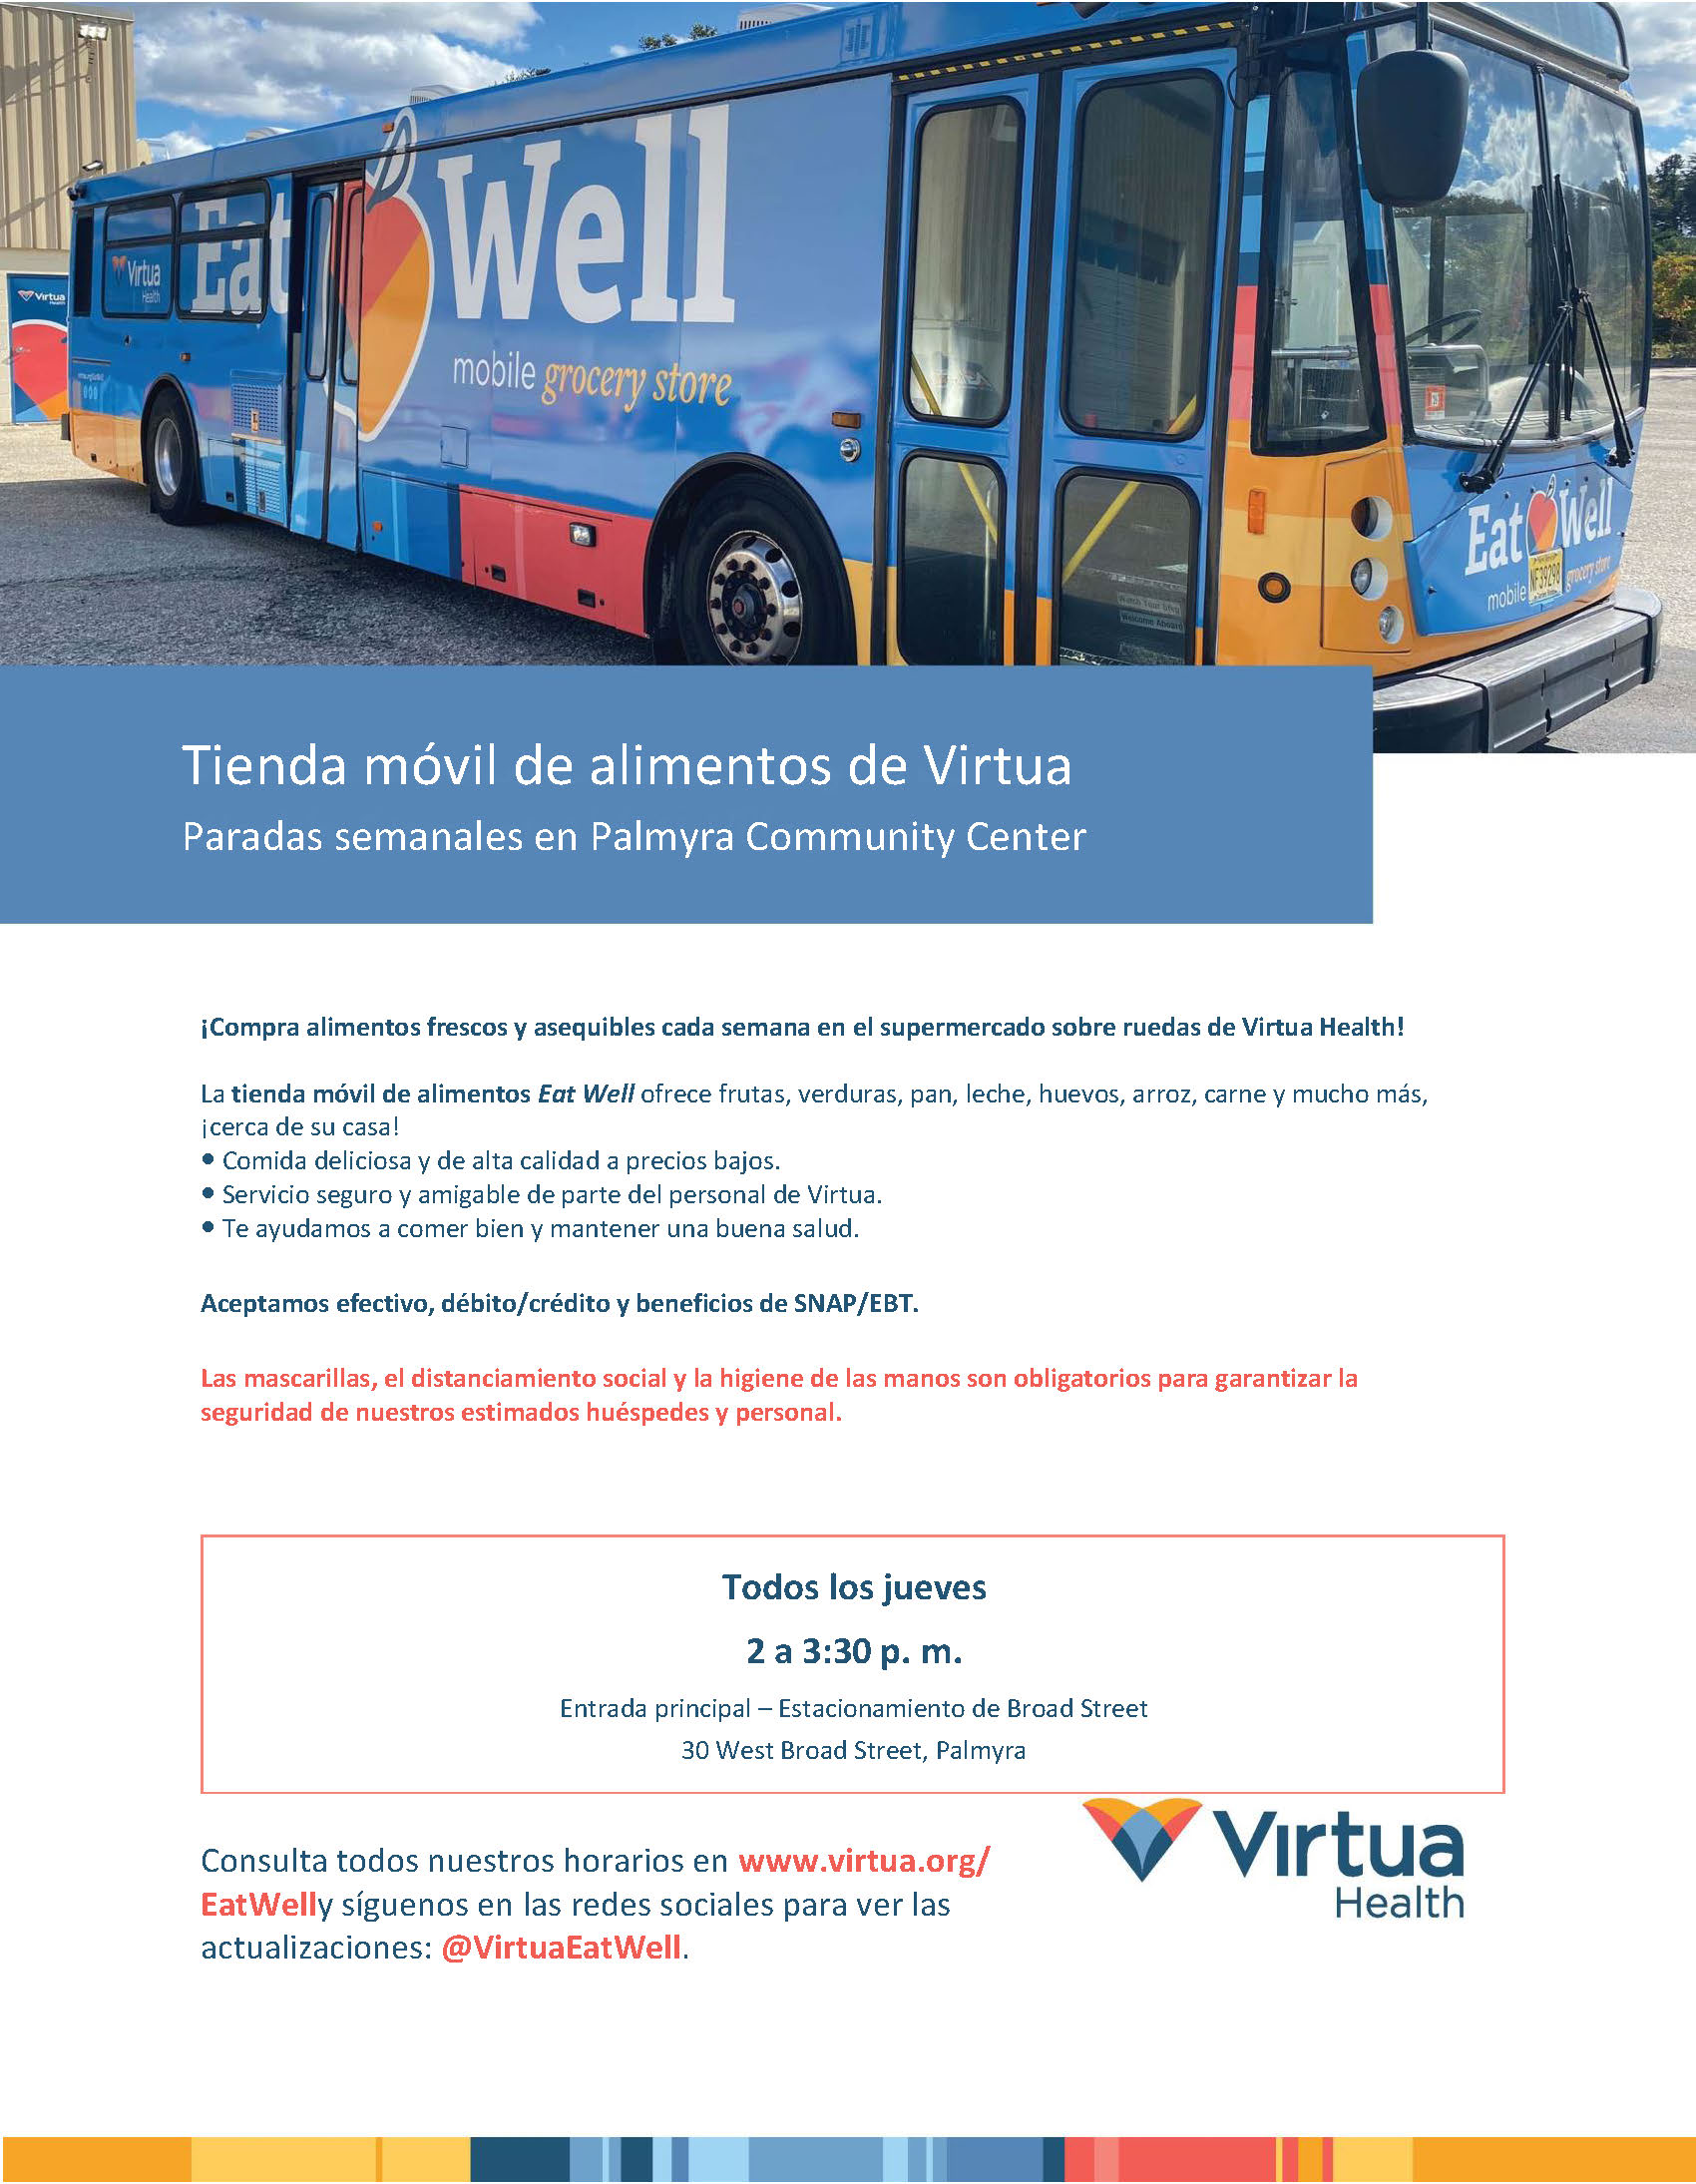 Photo of Eat Well bus from Virtua Health for Palmyra in spanish